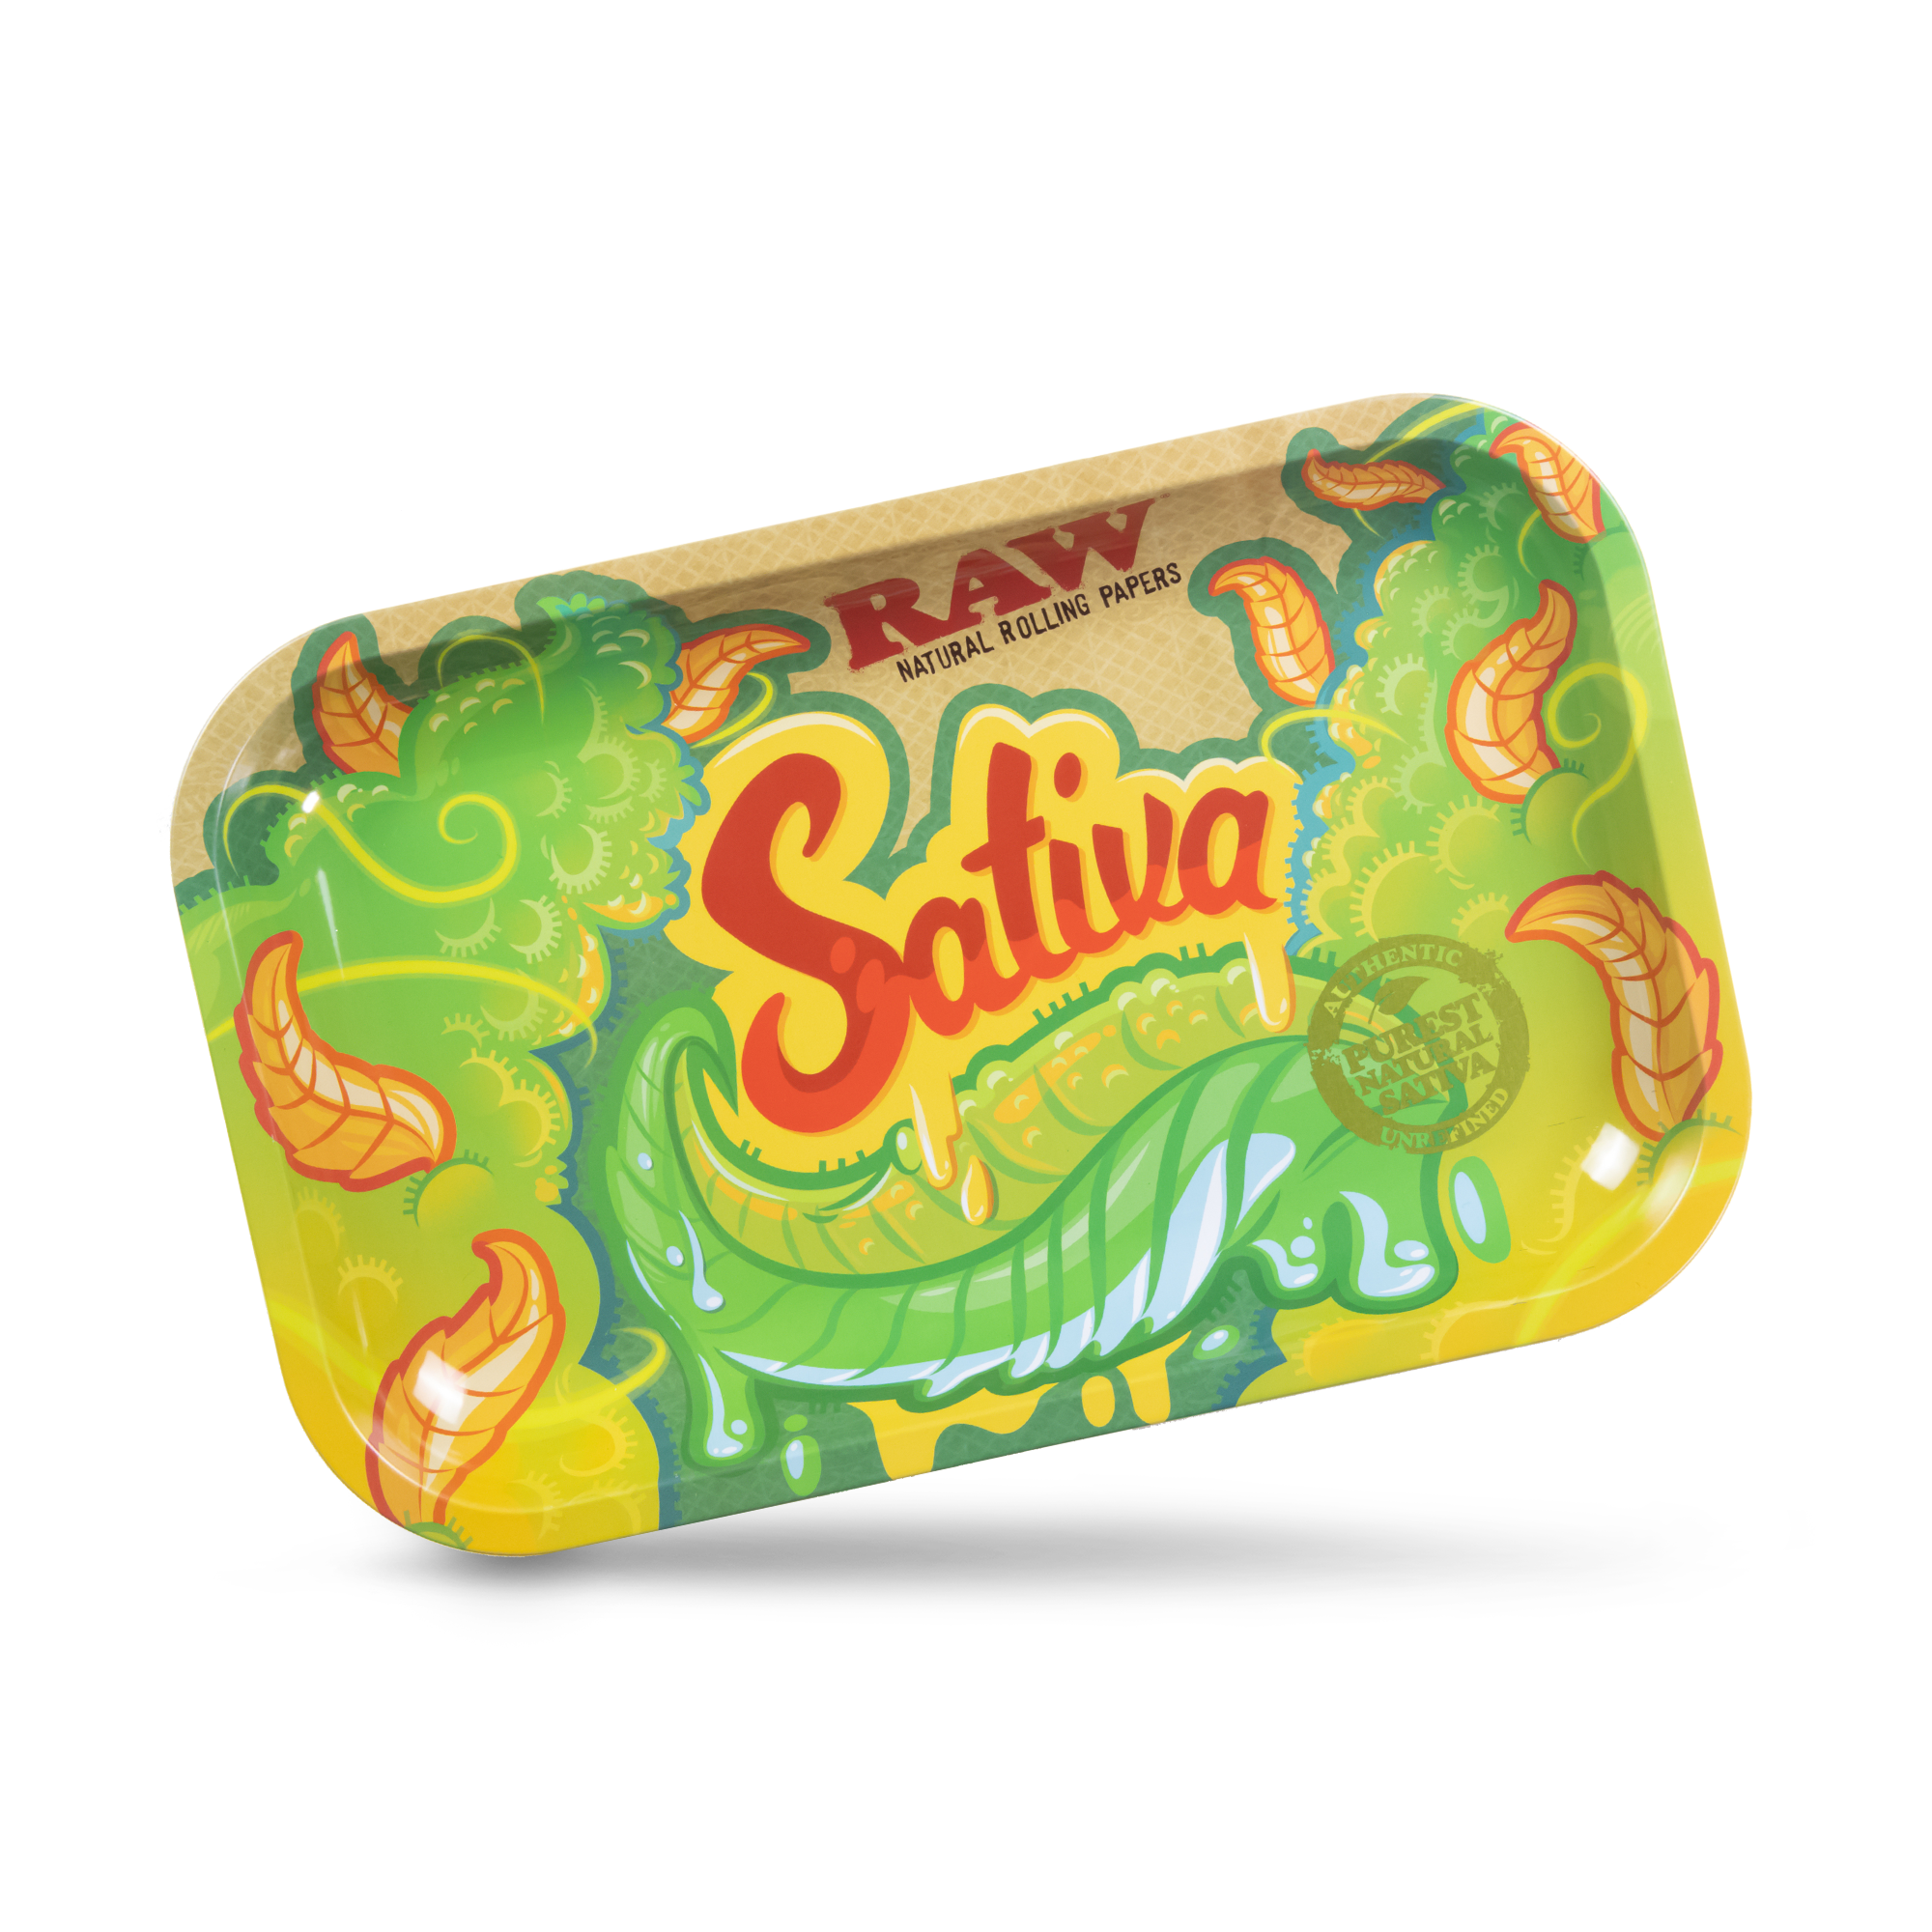 RAW Sativa Rolling Tray Rolling Trays WAR00163-MUSA01 esd-official